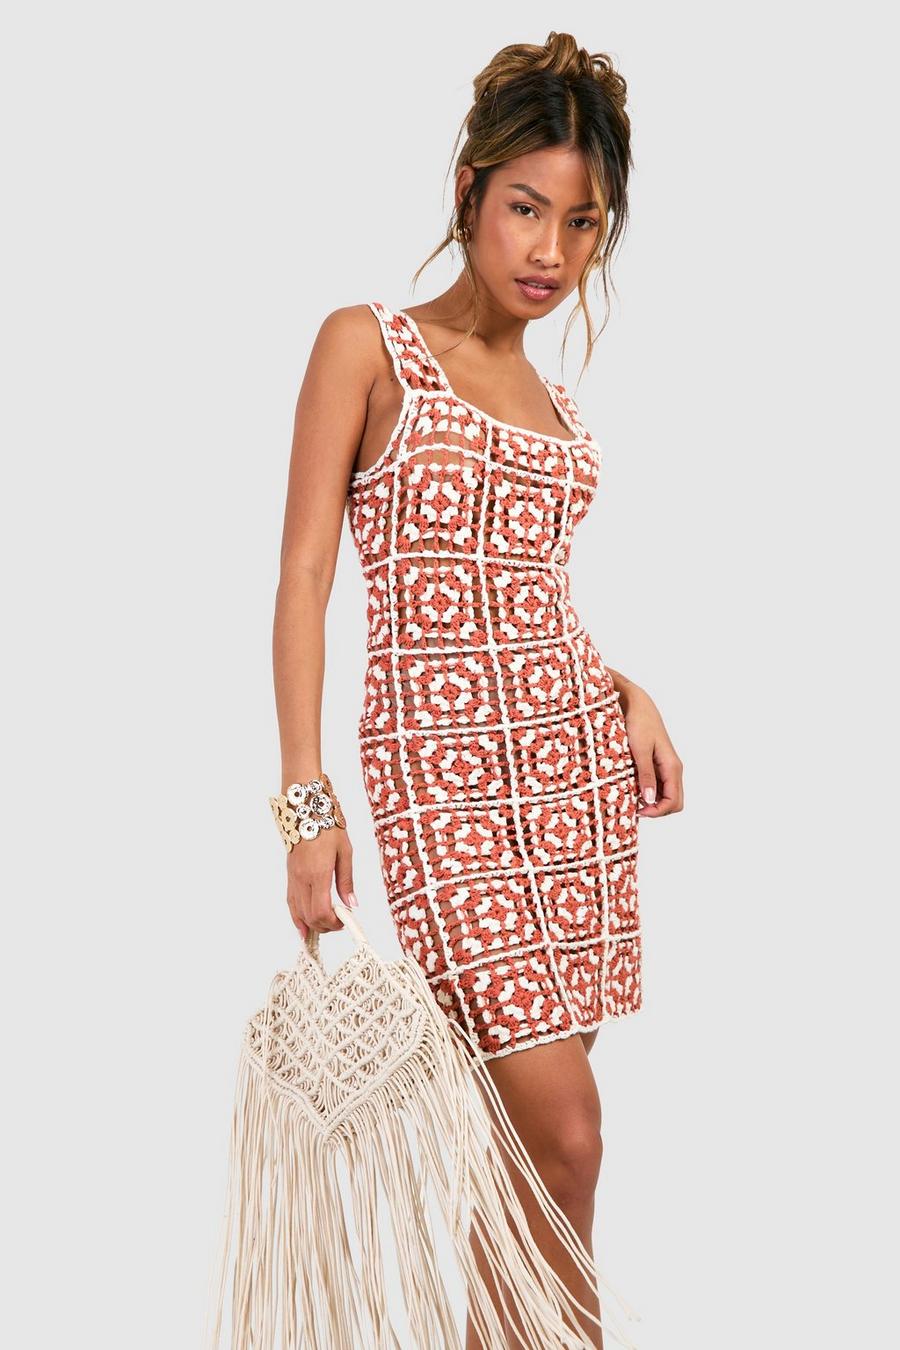 Terracotta Going Out Dresses